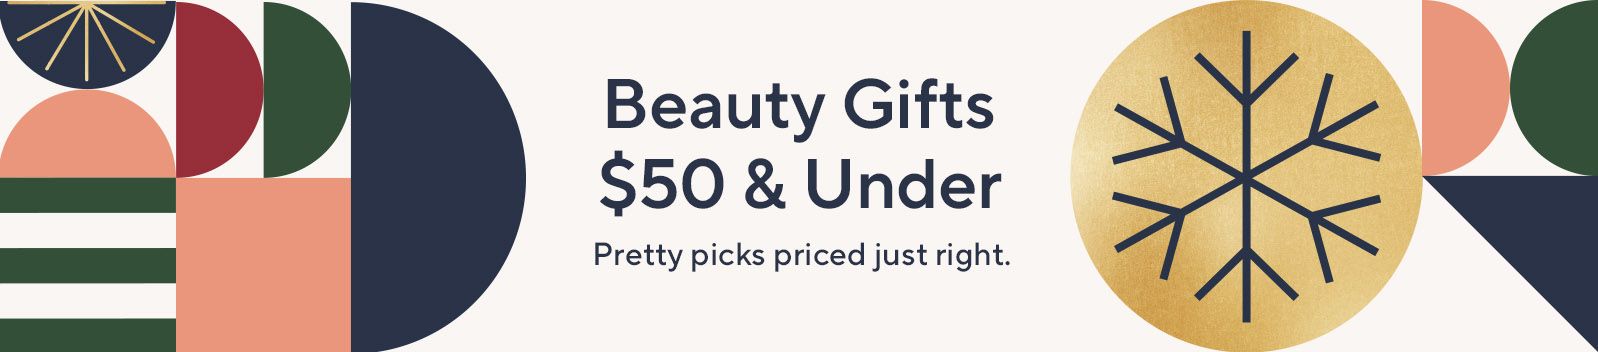 Beauty Gifts $50 & Under - Pretty picks priced just right.